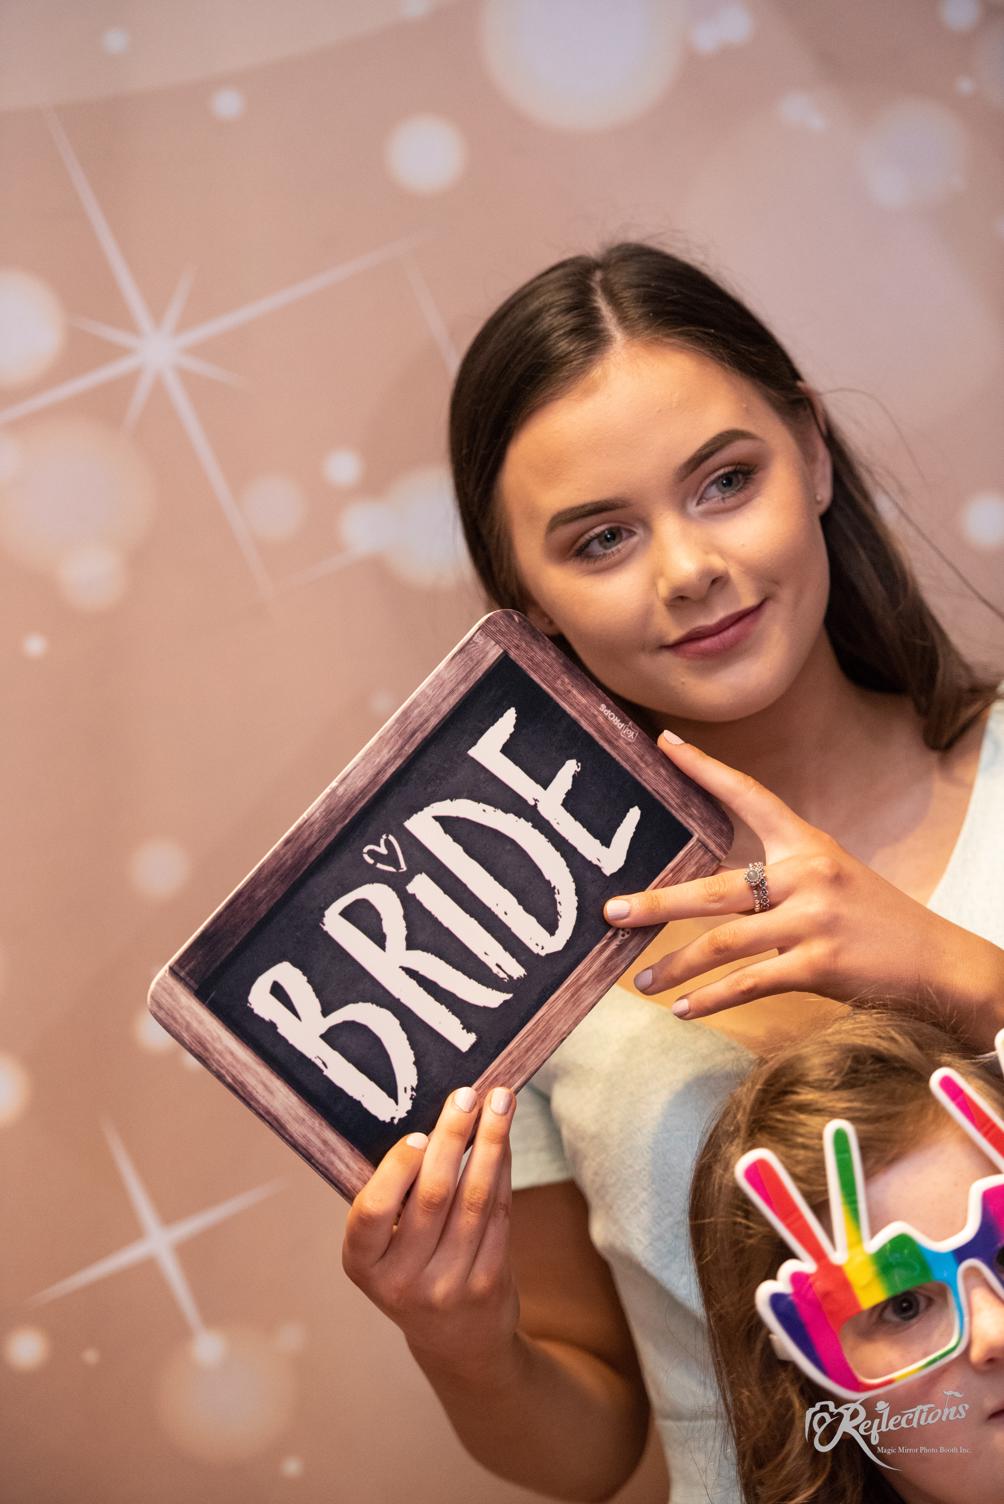 bride with sign image.jpg